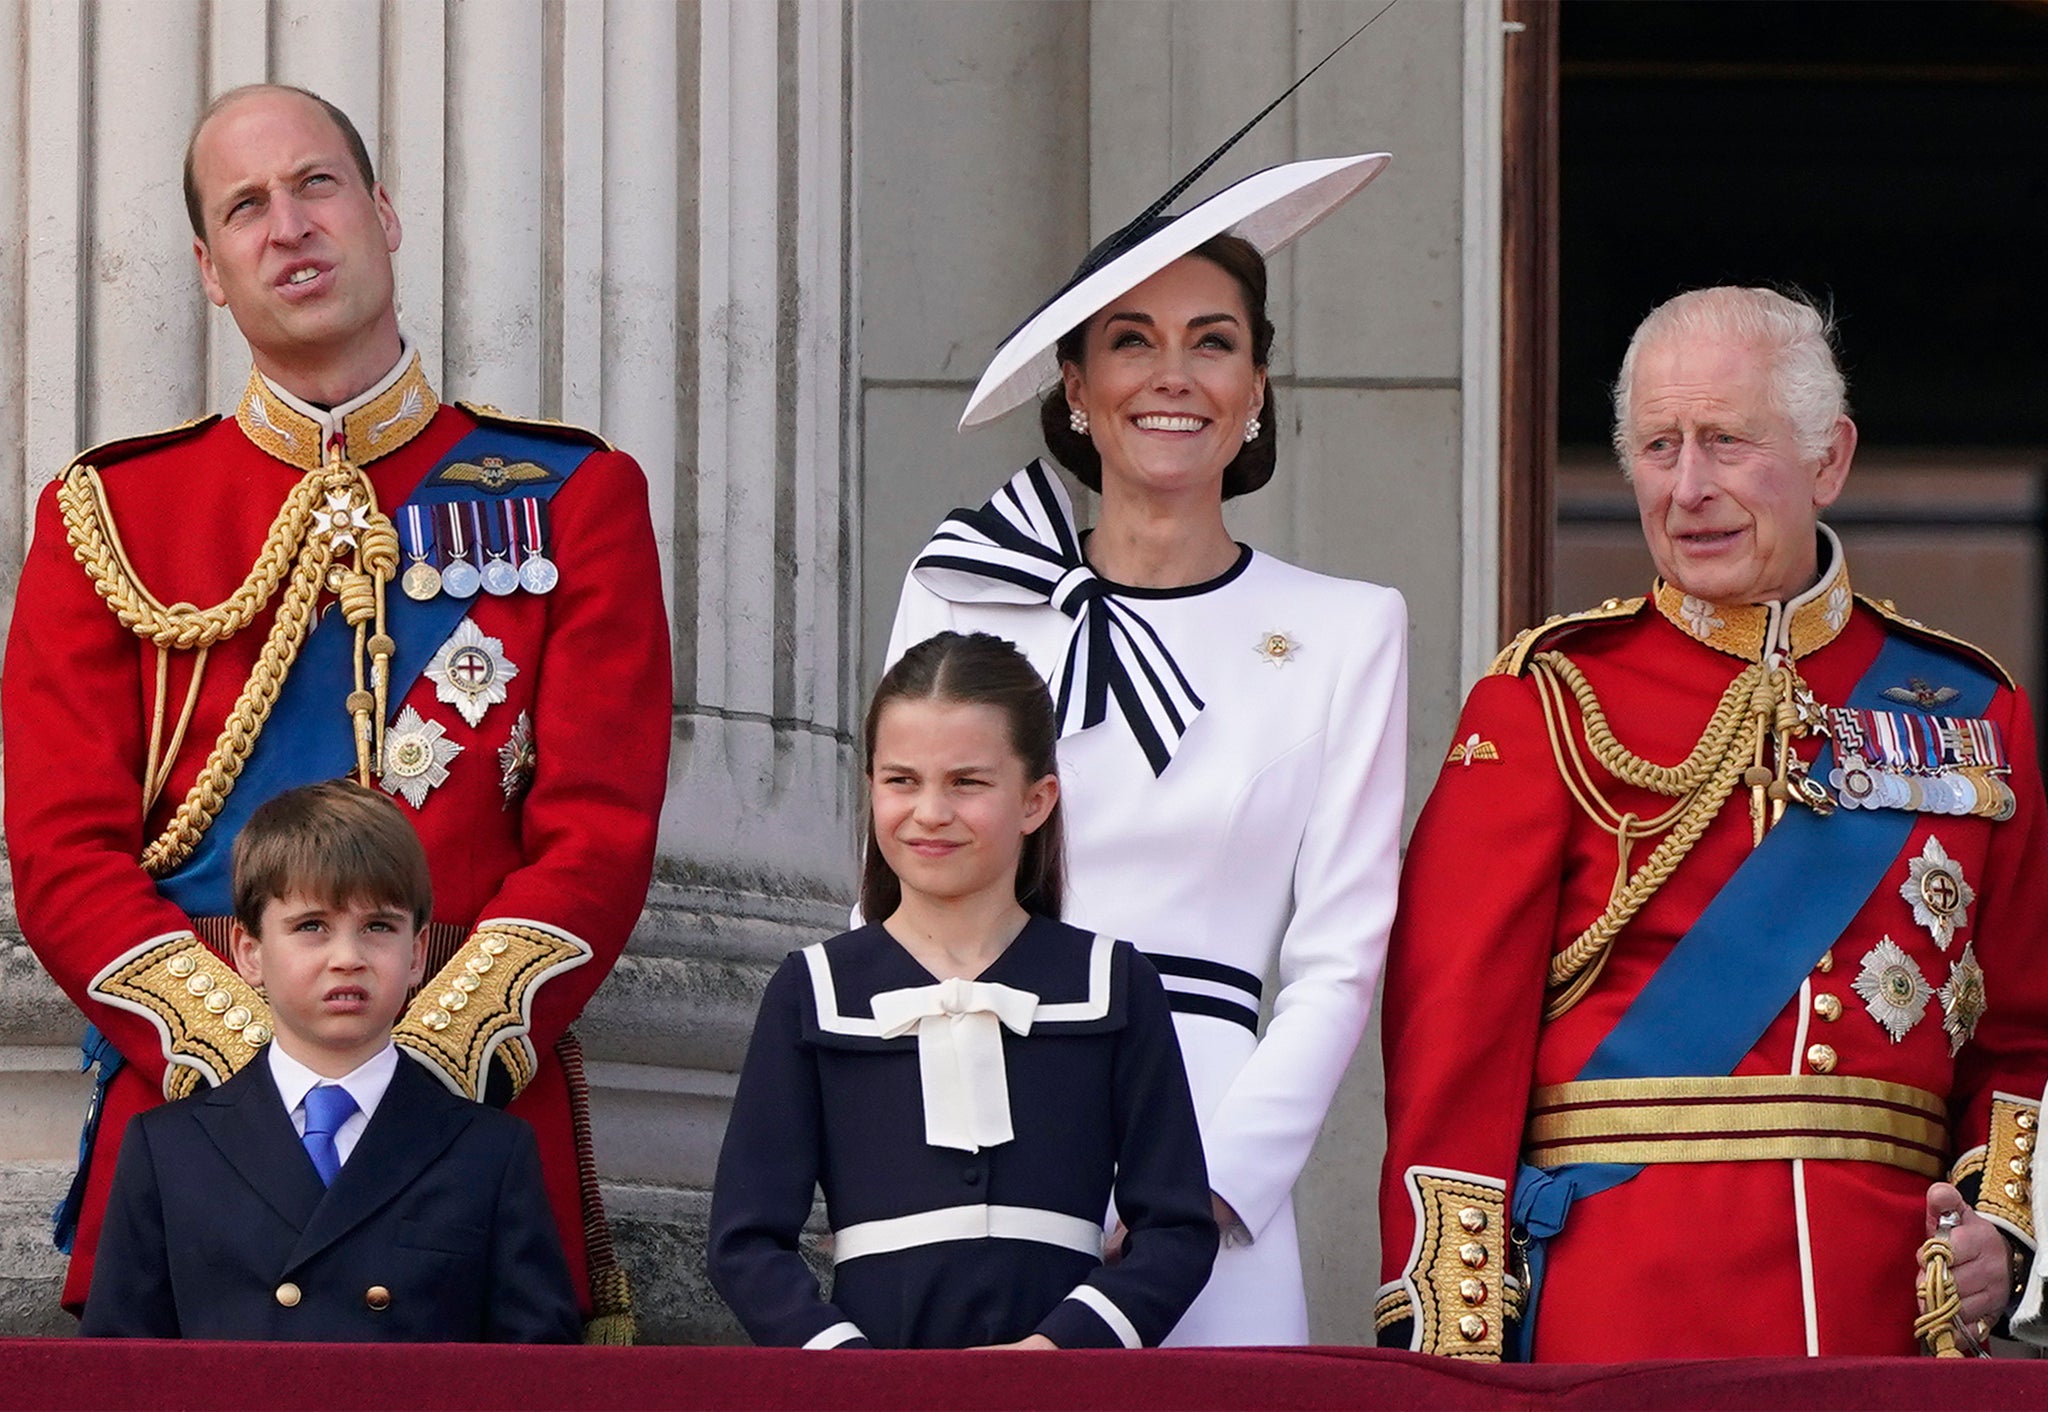 The King and Princess appeared close as they watched the RAF Flypast.